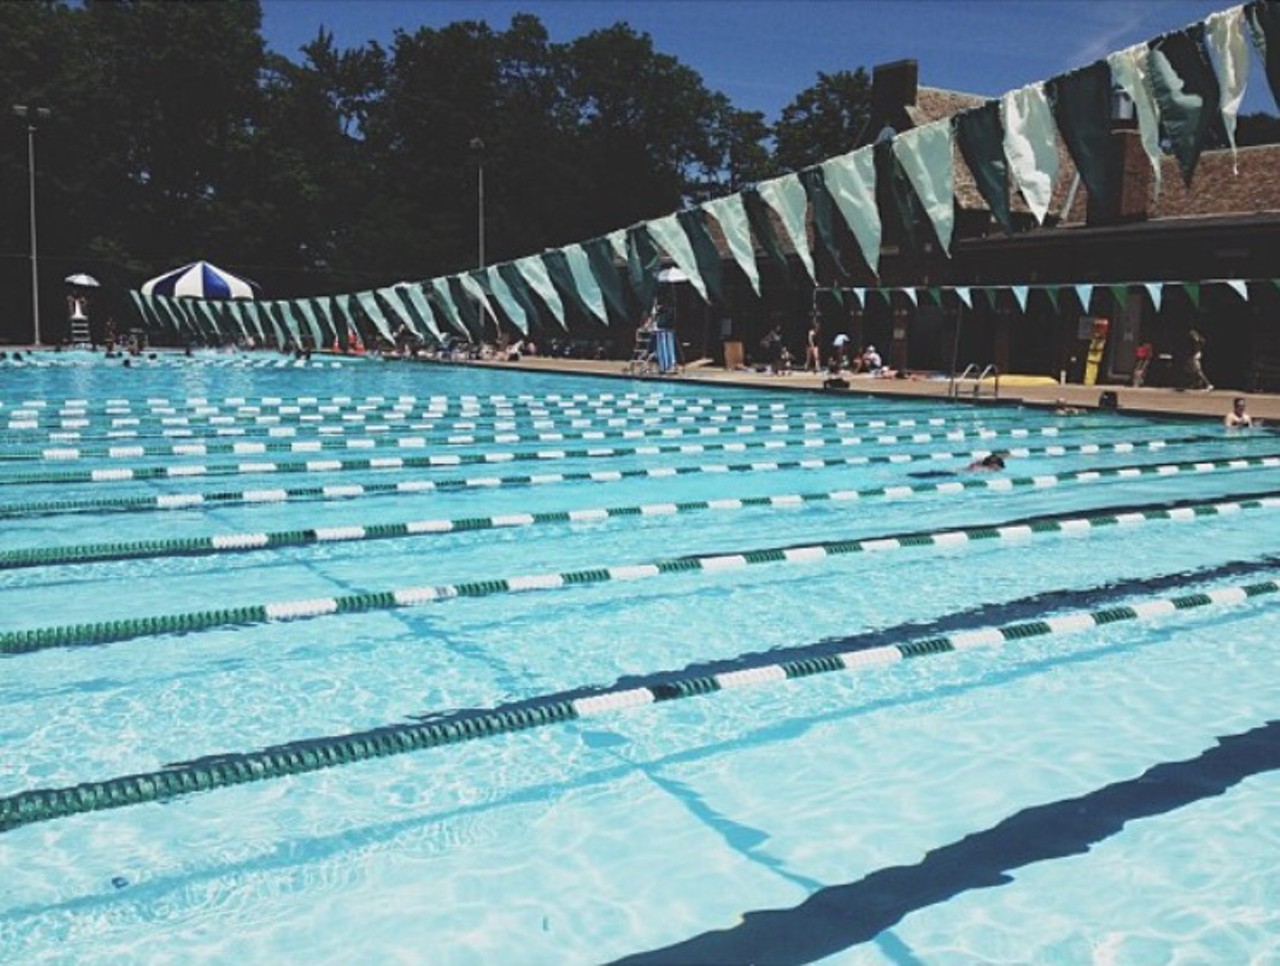 Cumberland Pool - Swim some laps and have a picnic on the eastside in Cleveland Heights at 1740 Cumberland Rd,
Cleveland, OH
(Photo courtesy of Instagram user @Happyjackjack)